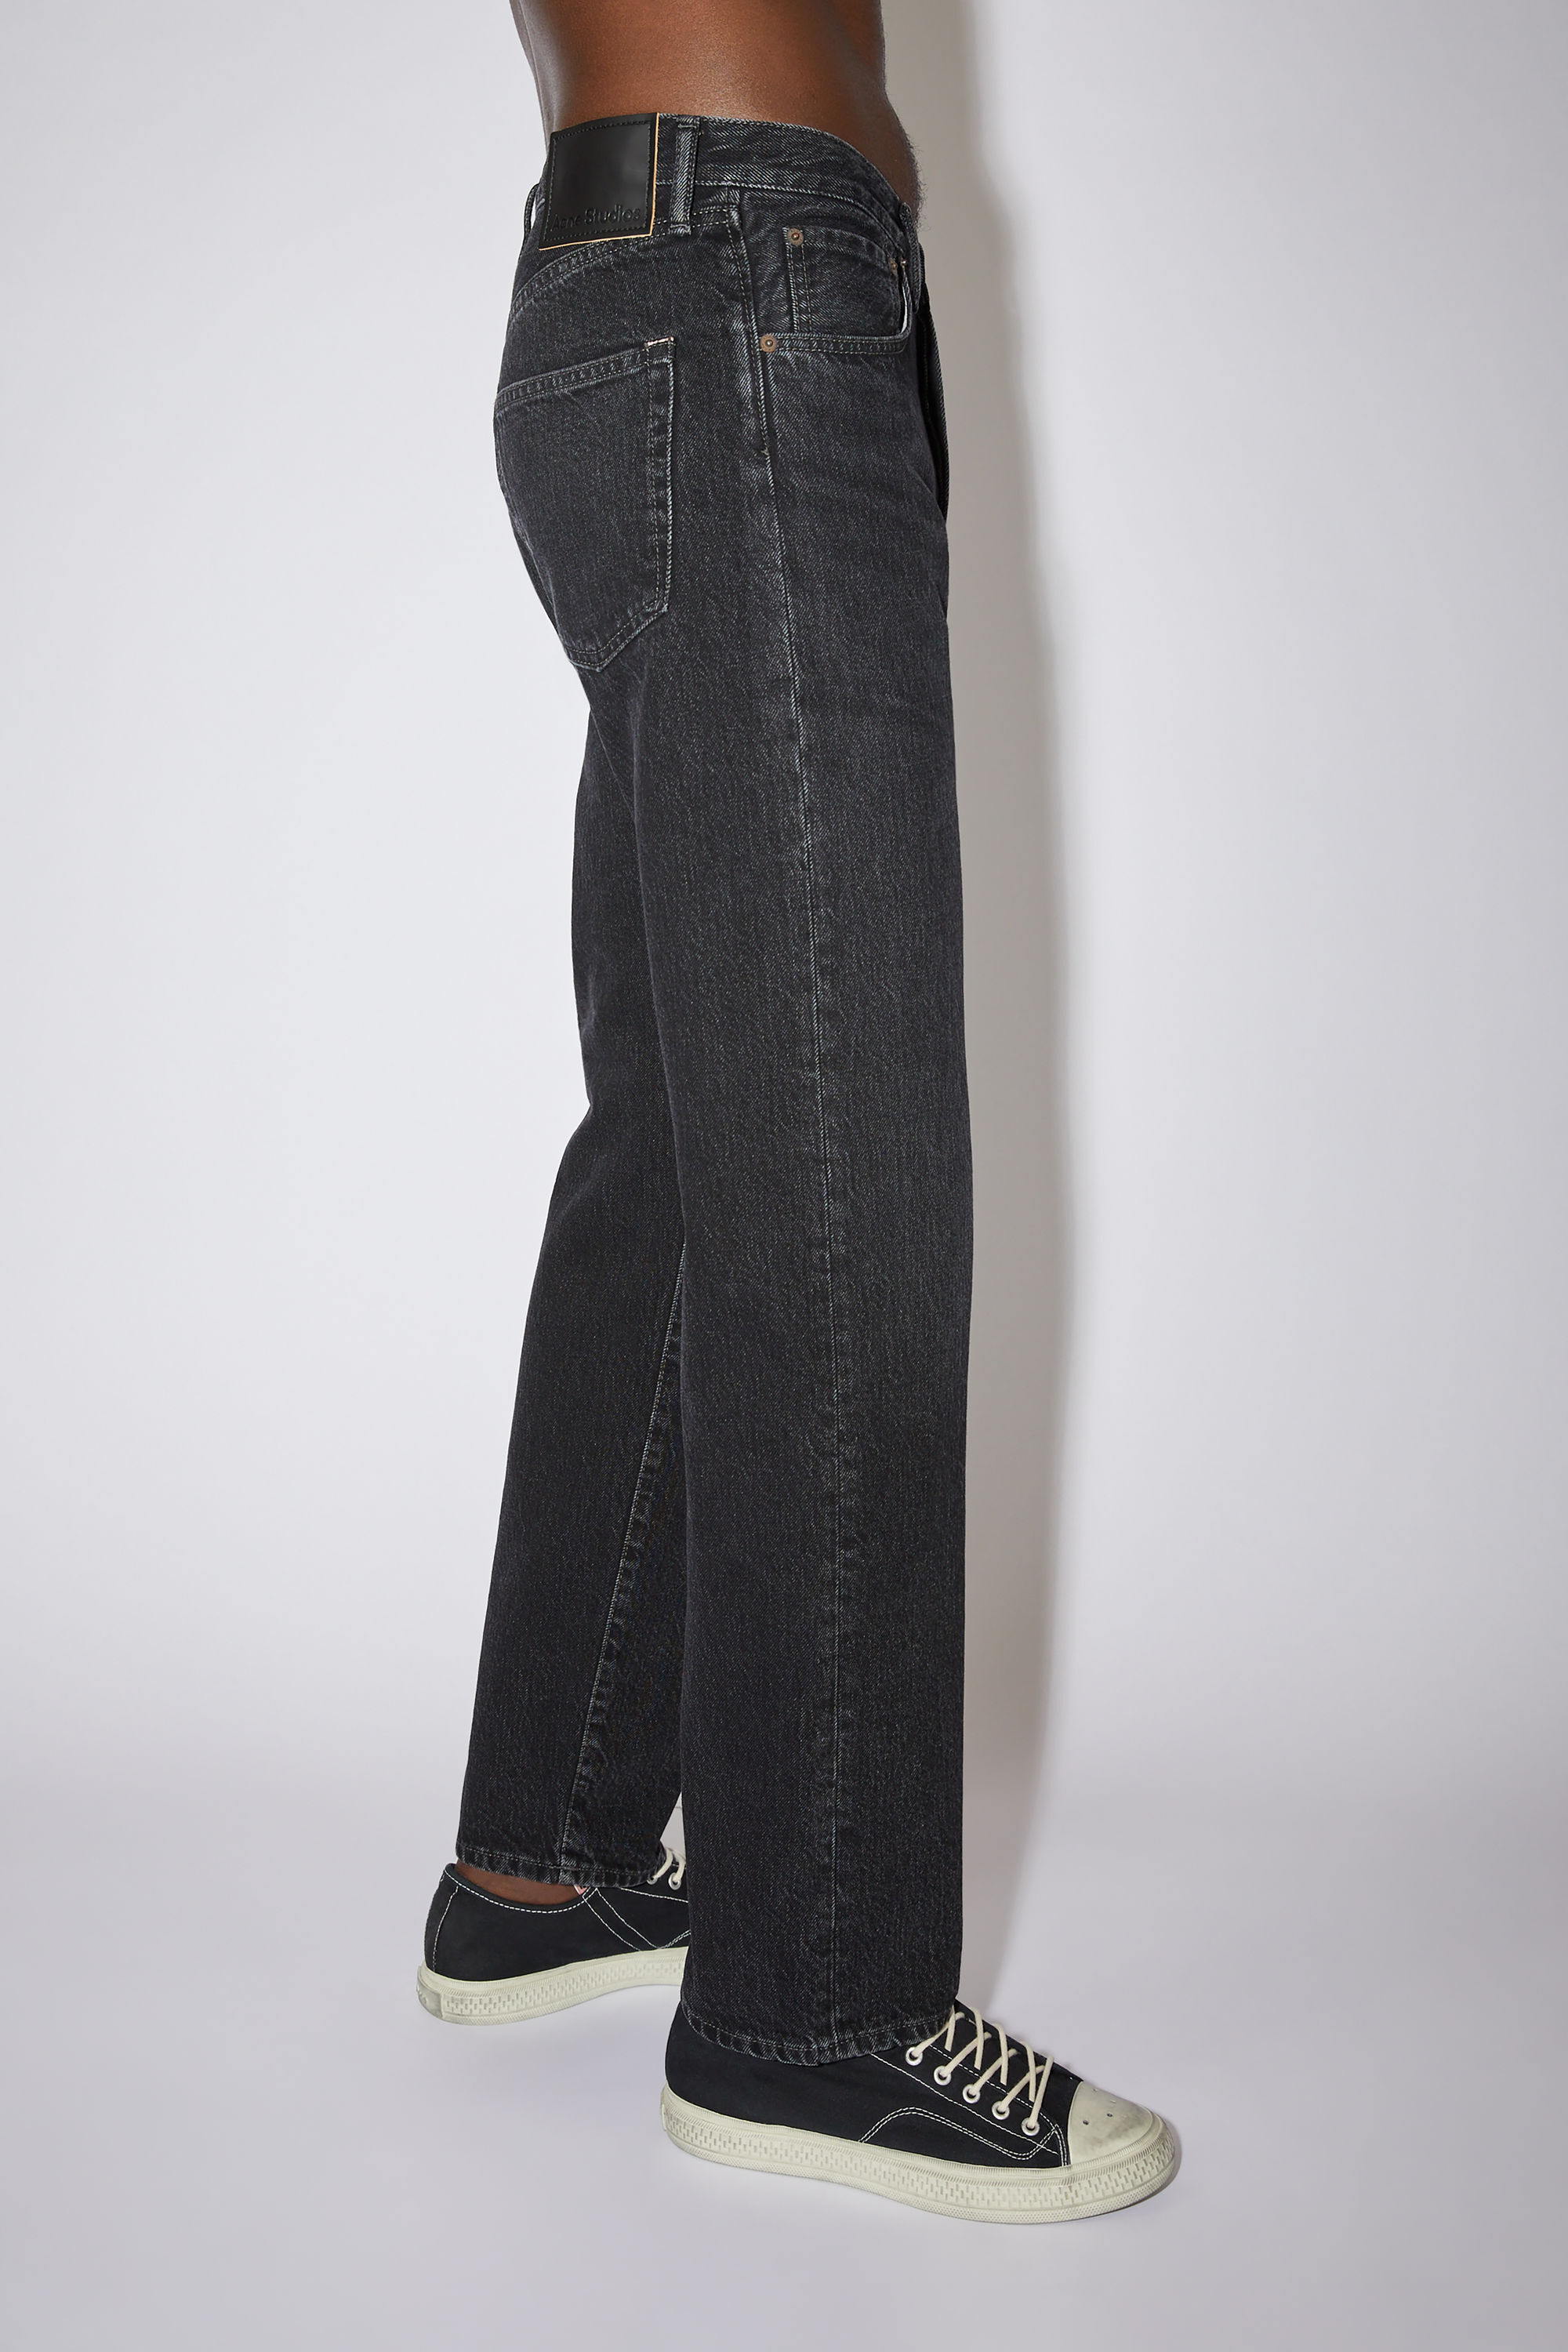 Acne Studios - Relaxed fit jeans - 2003 - Black